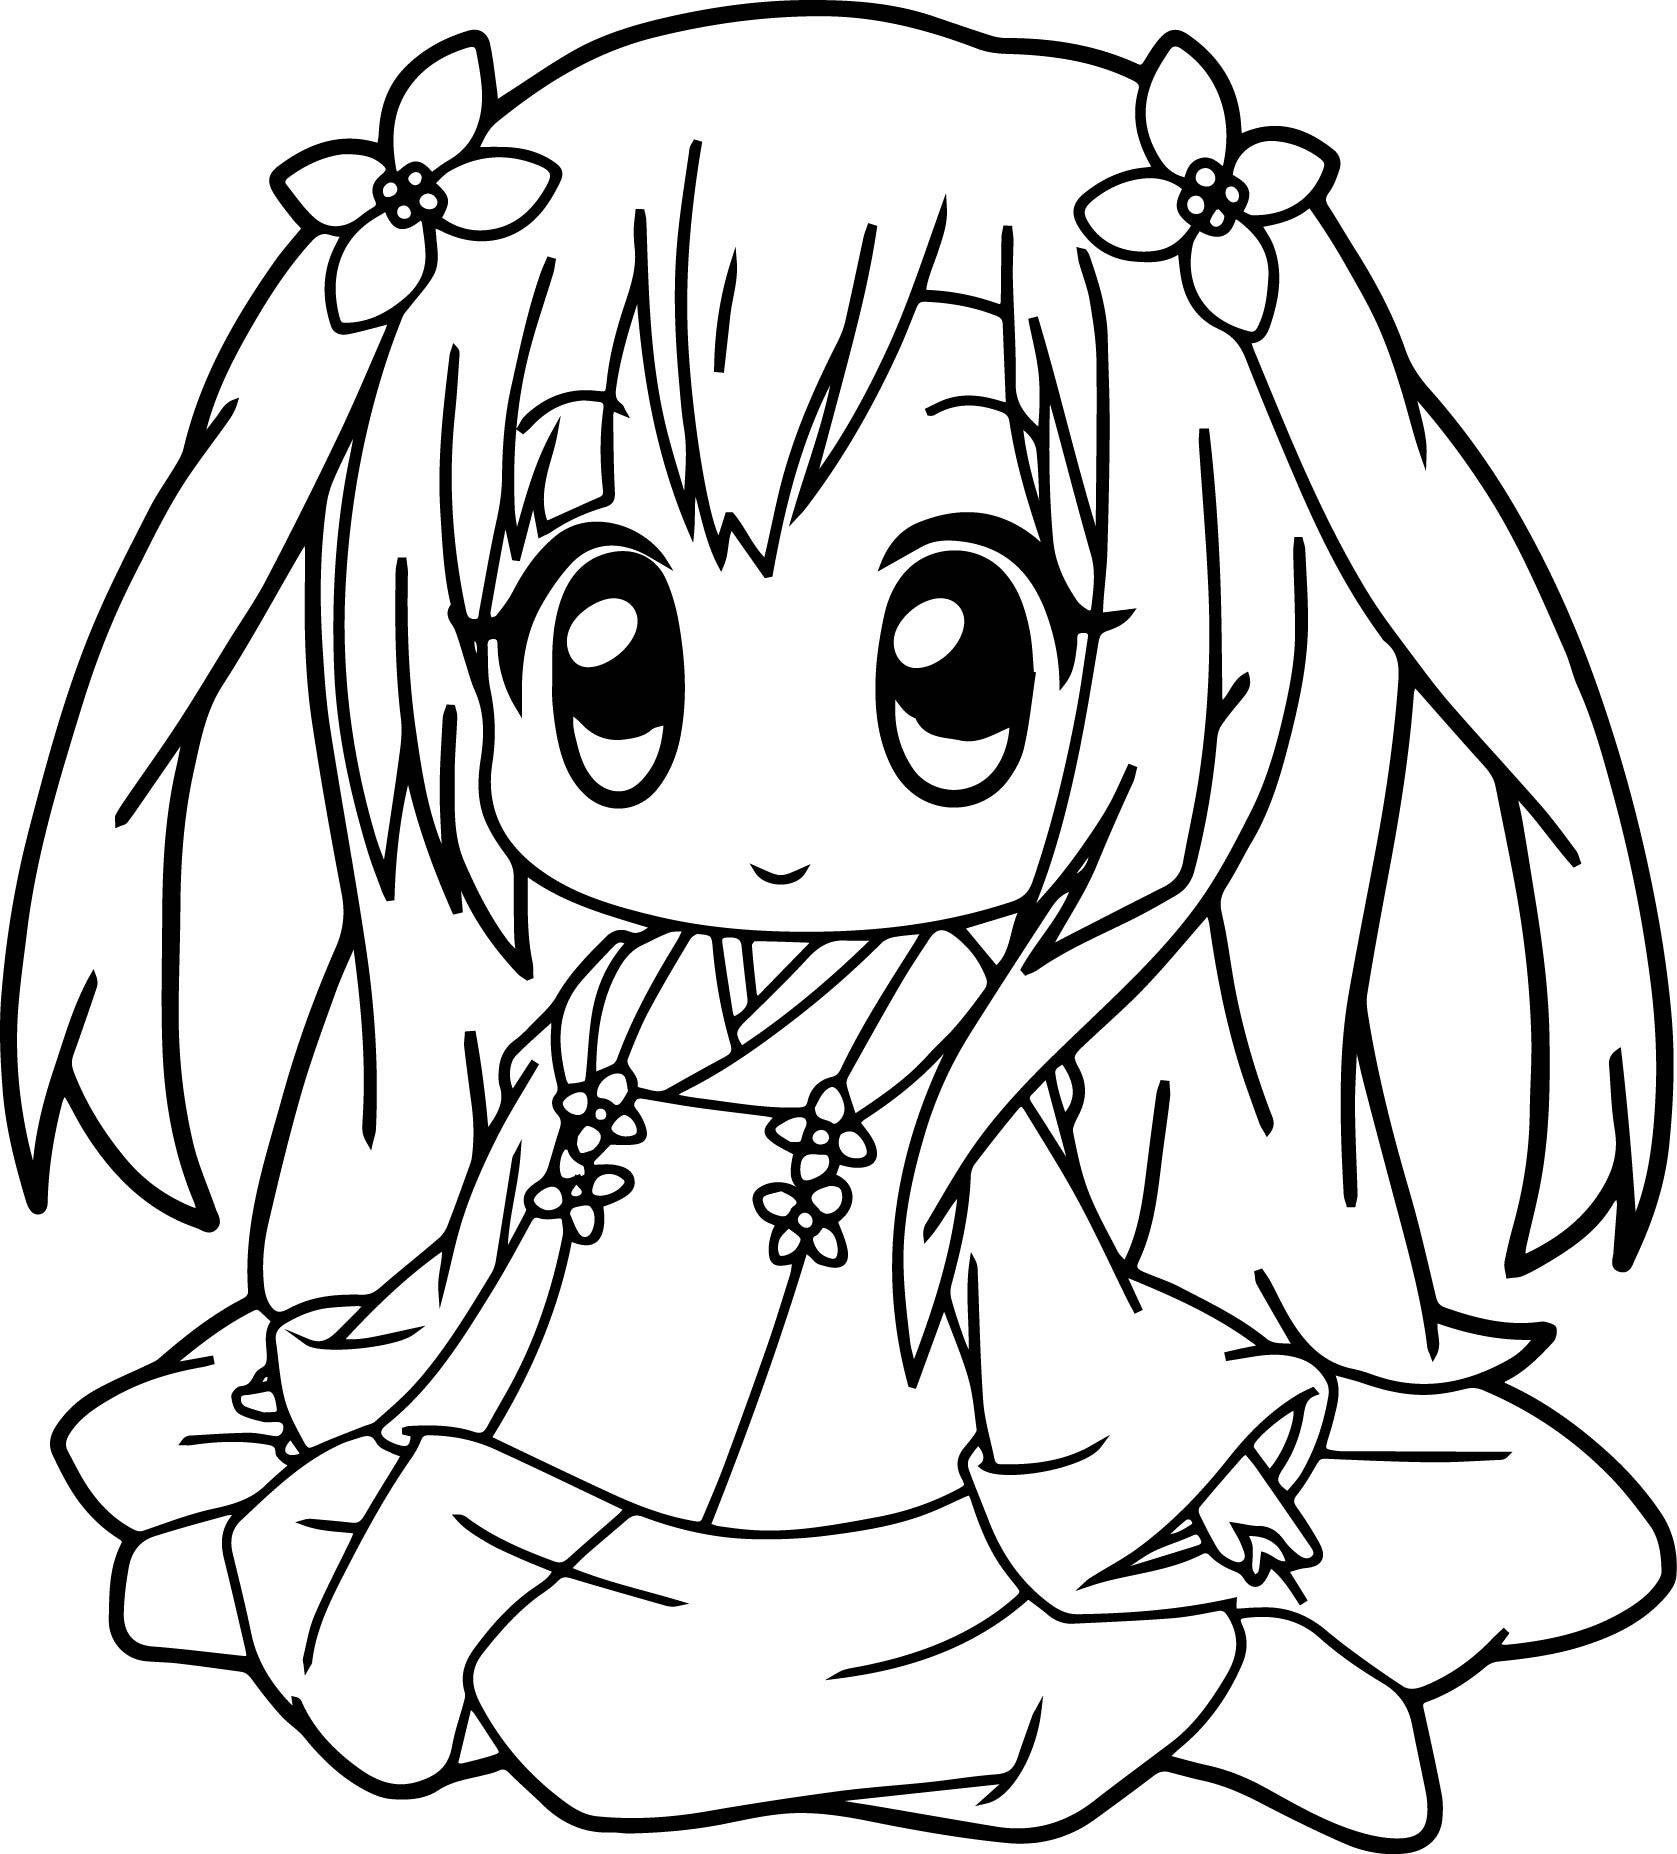 Animated Girl Coloring Pages
 Anime Girl Coloring Pages coloringsuite